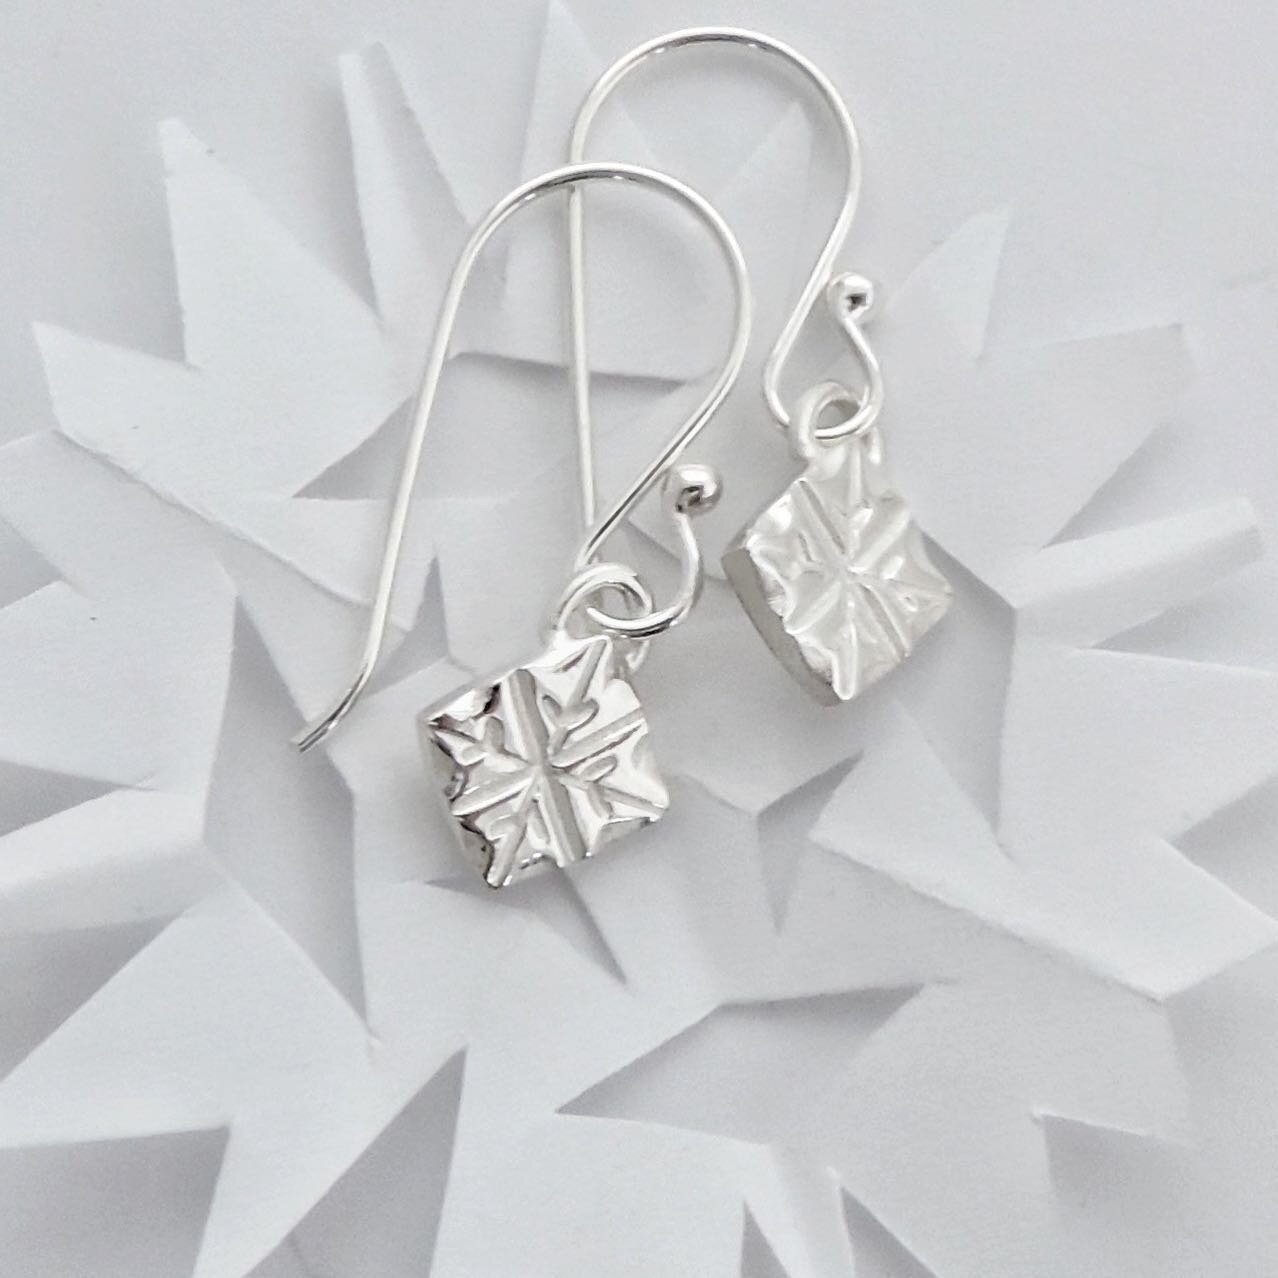 I&rsquo;ve created a limited edition snowflake series that will be live this Monday on my website. Stay tuned to see the matching pendant!